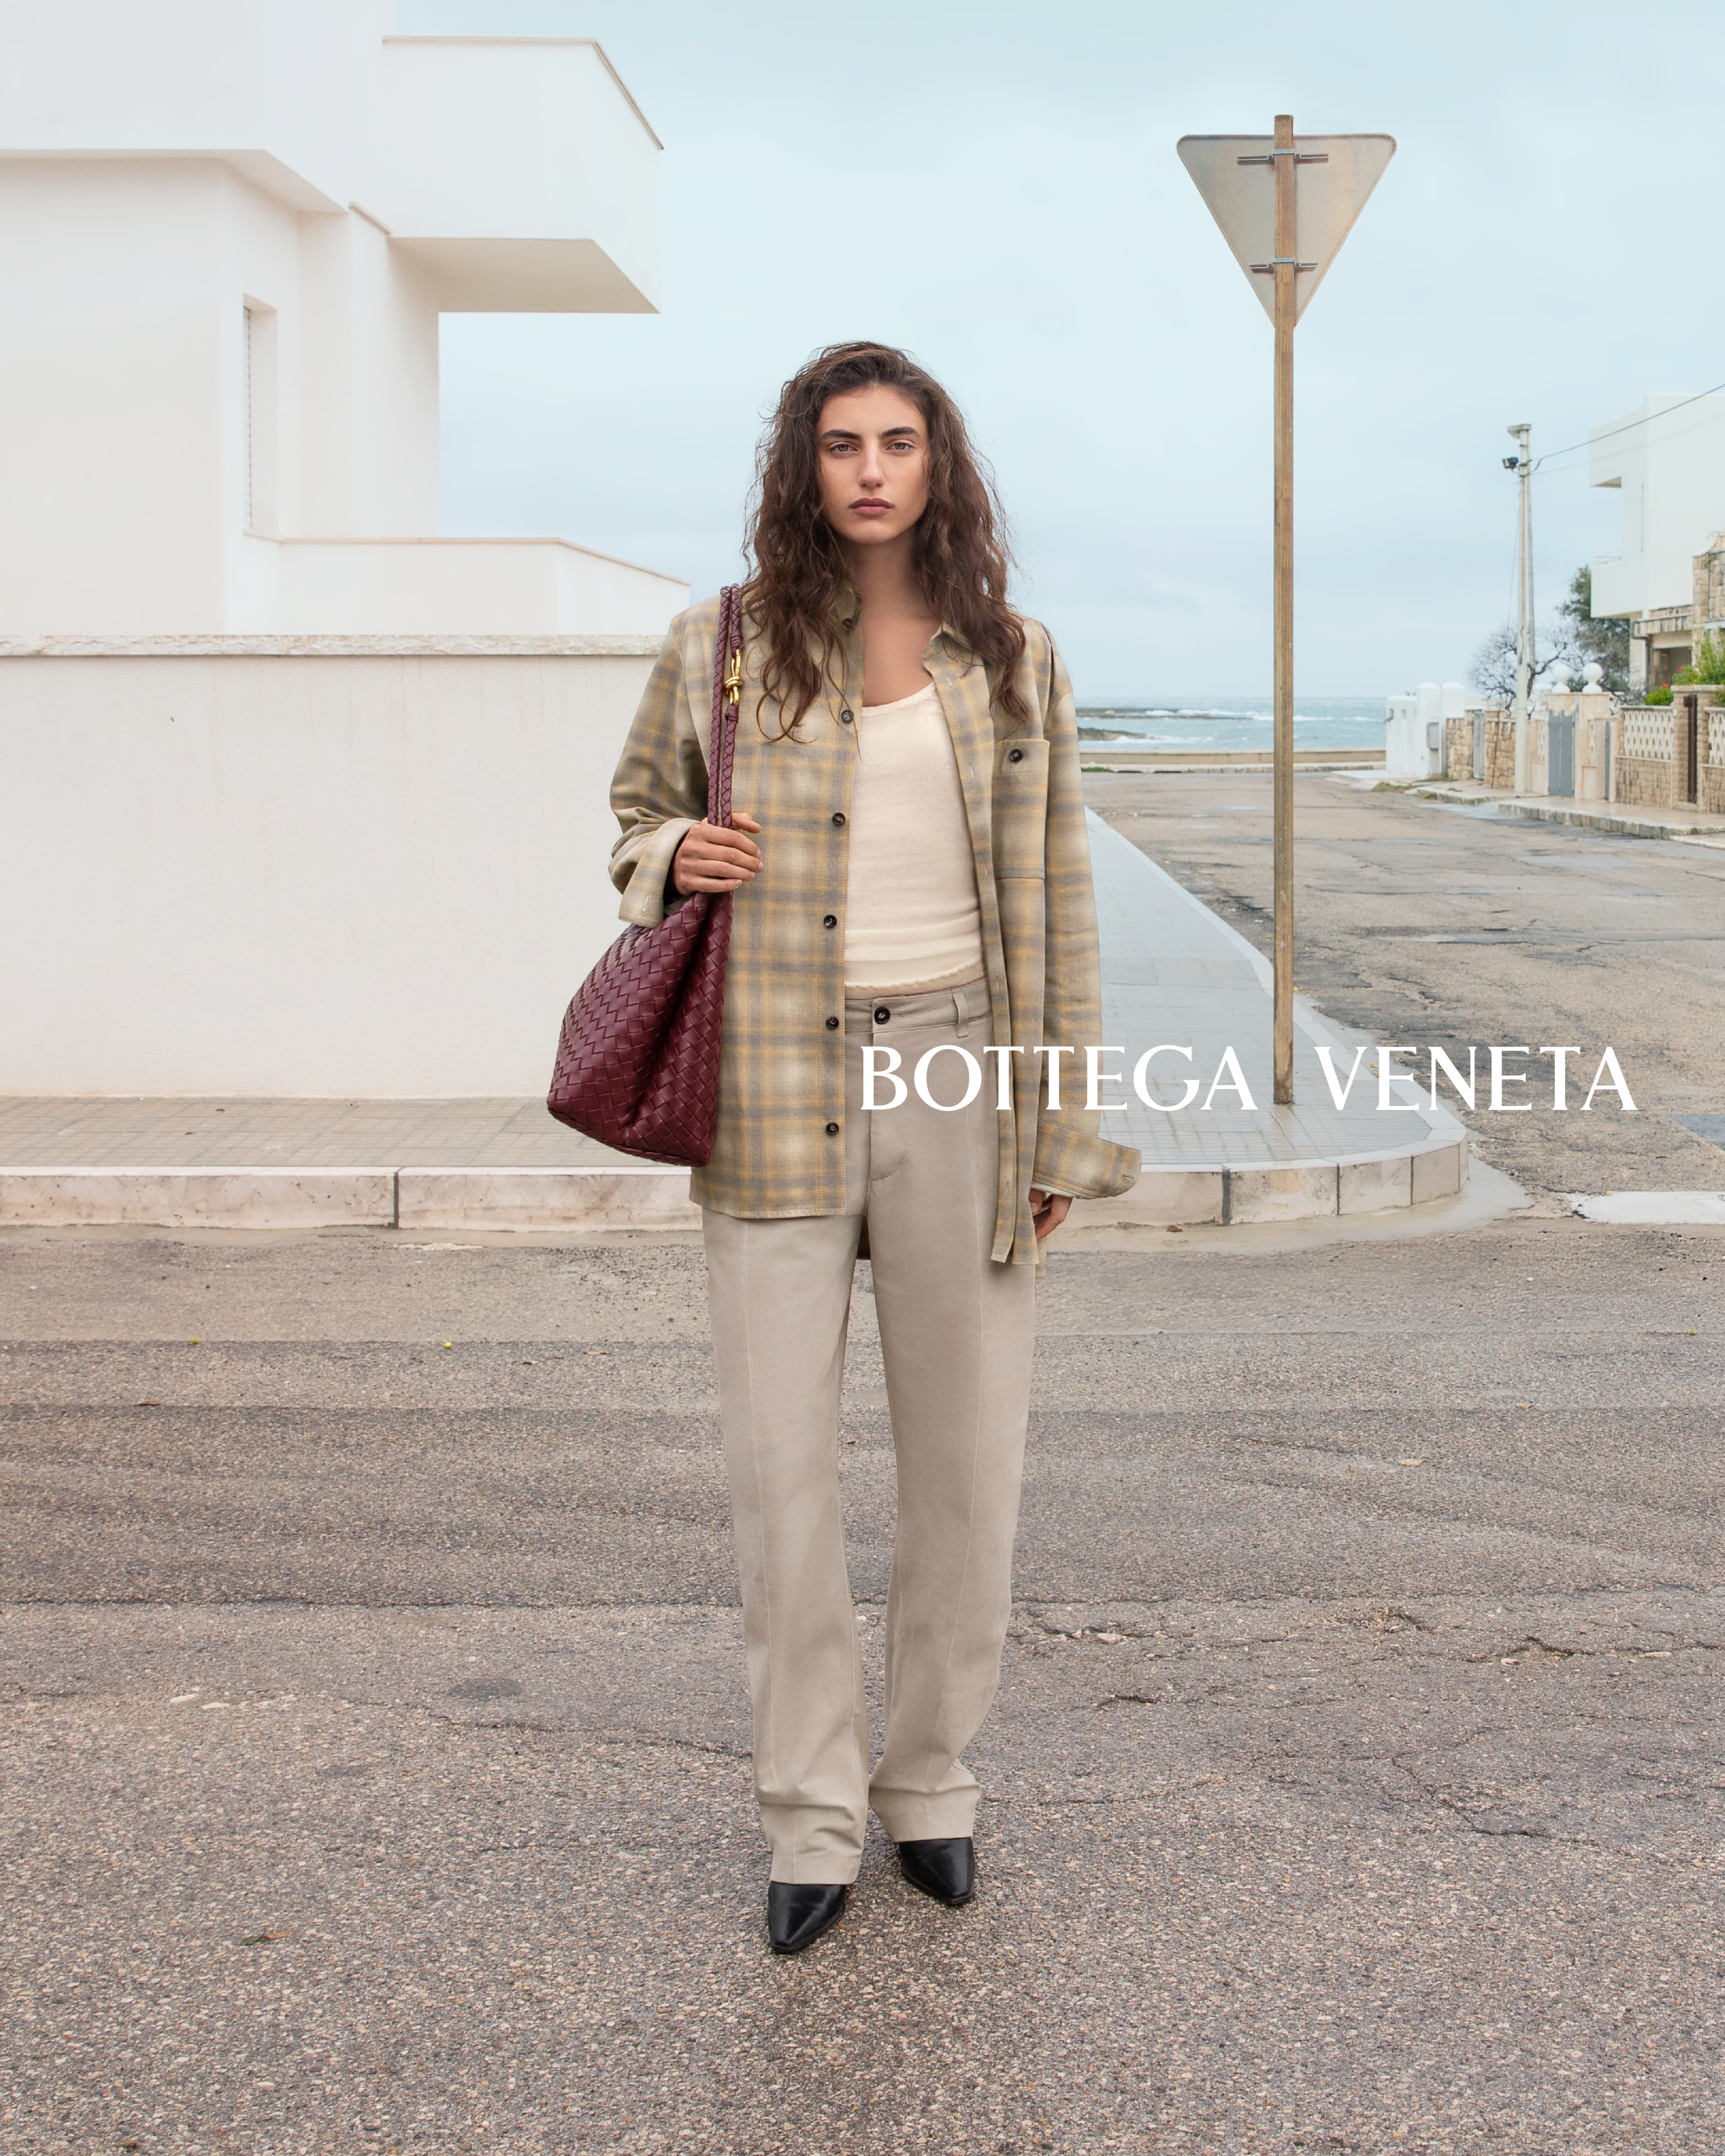 Bottega Veneta's Winter 2023 Campaign Pays Homage to the Power of  Architecture in New Film and Imagery